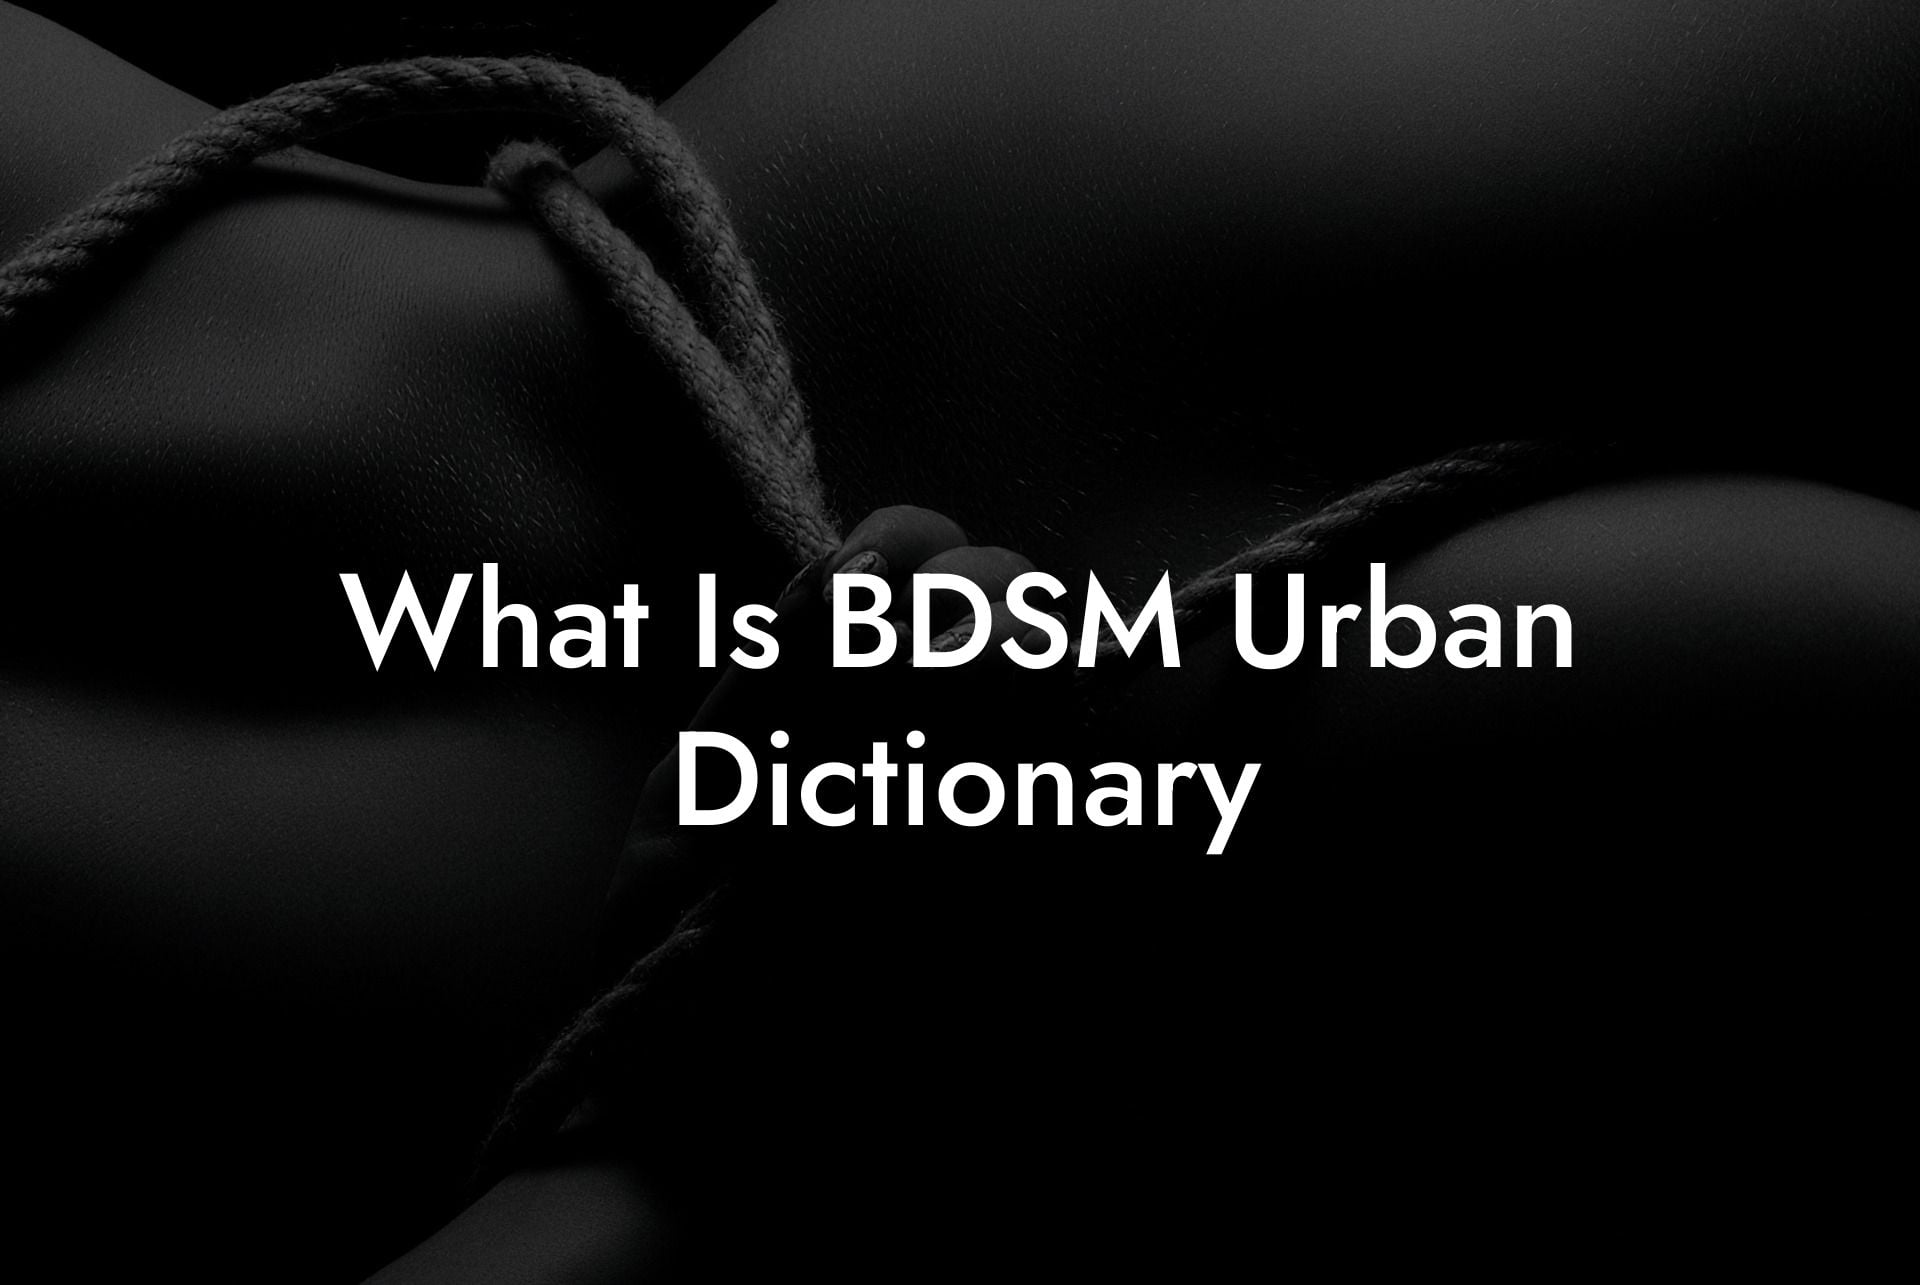 What Is BDSM Urban Dictionary